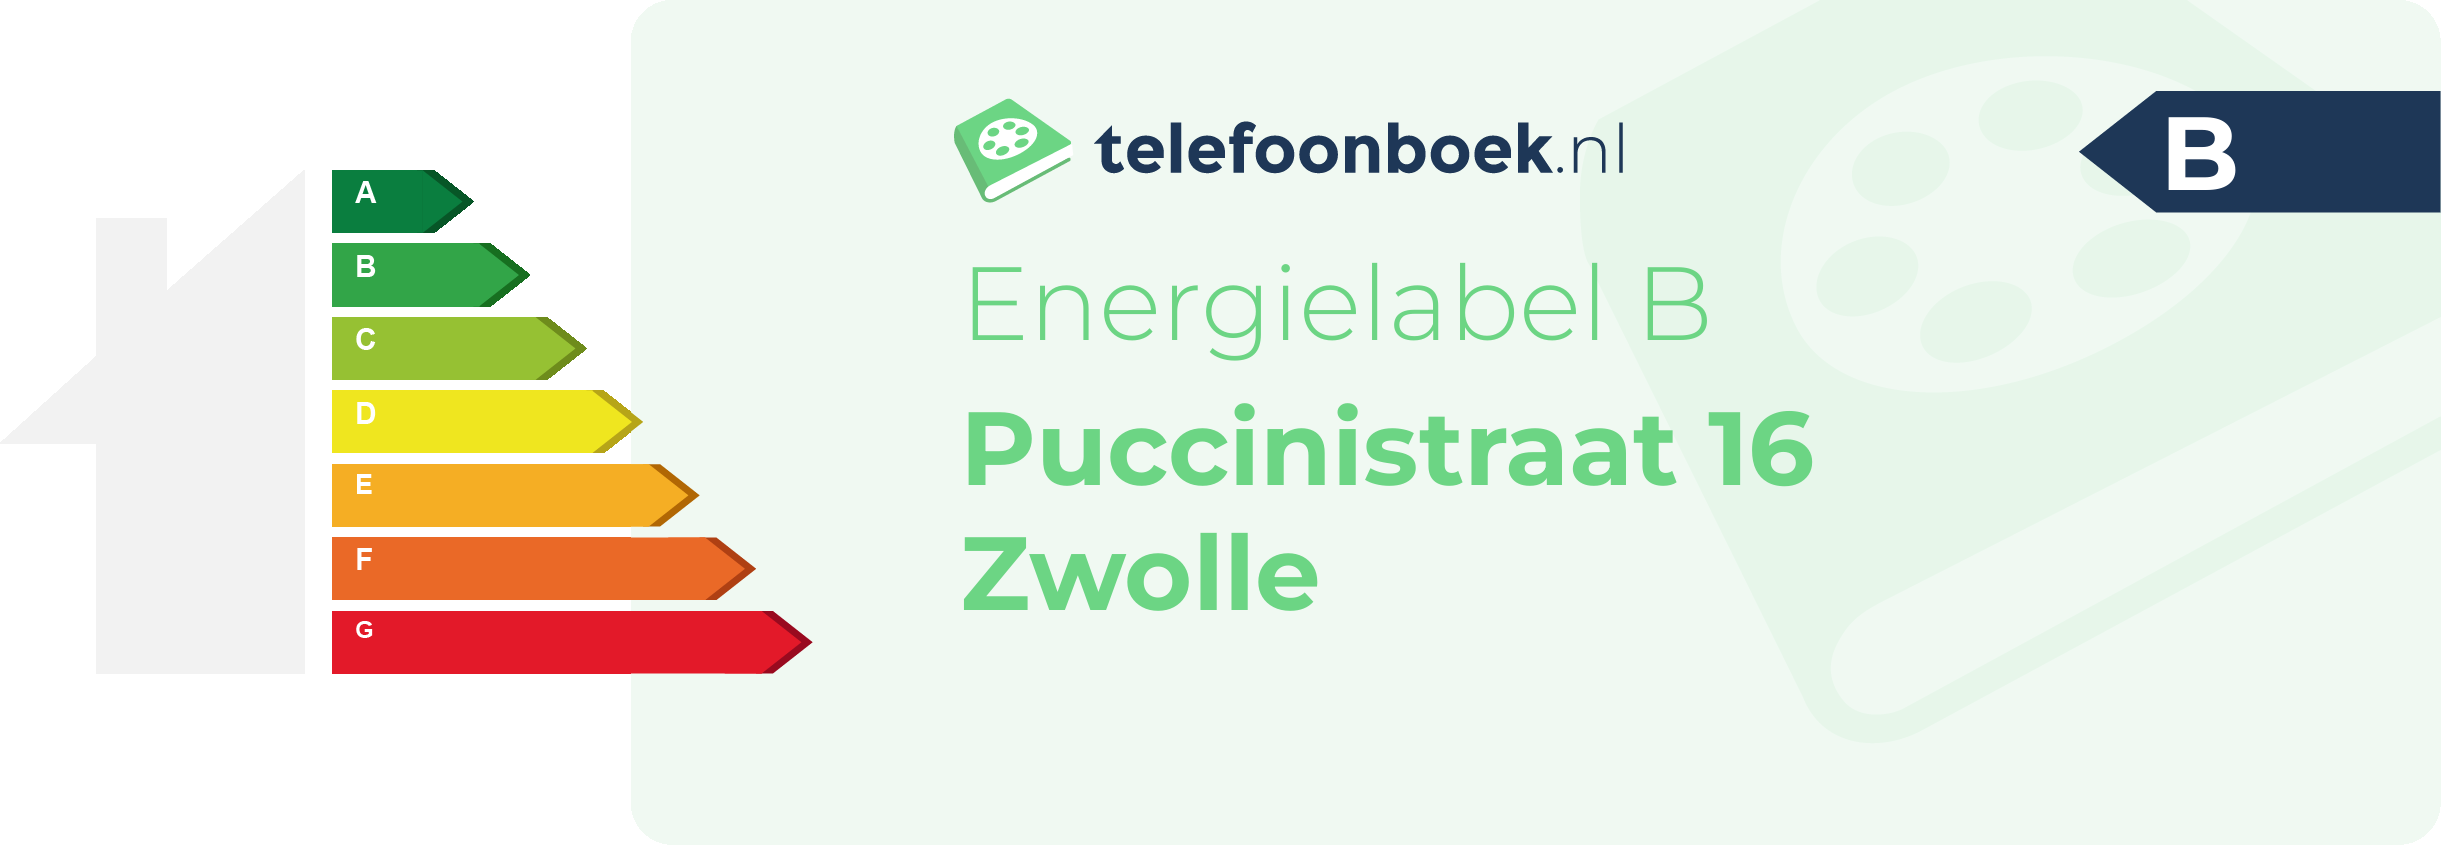 Energielabel Puccinistraat 16 Zwolle